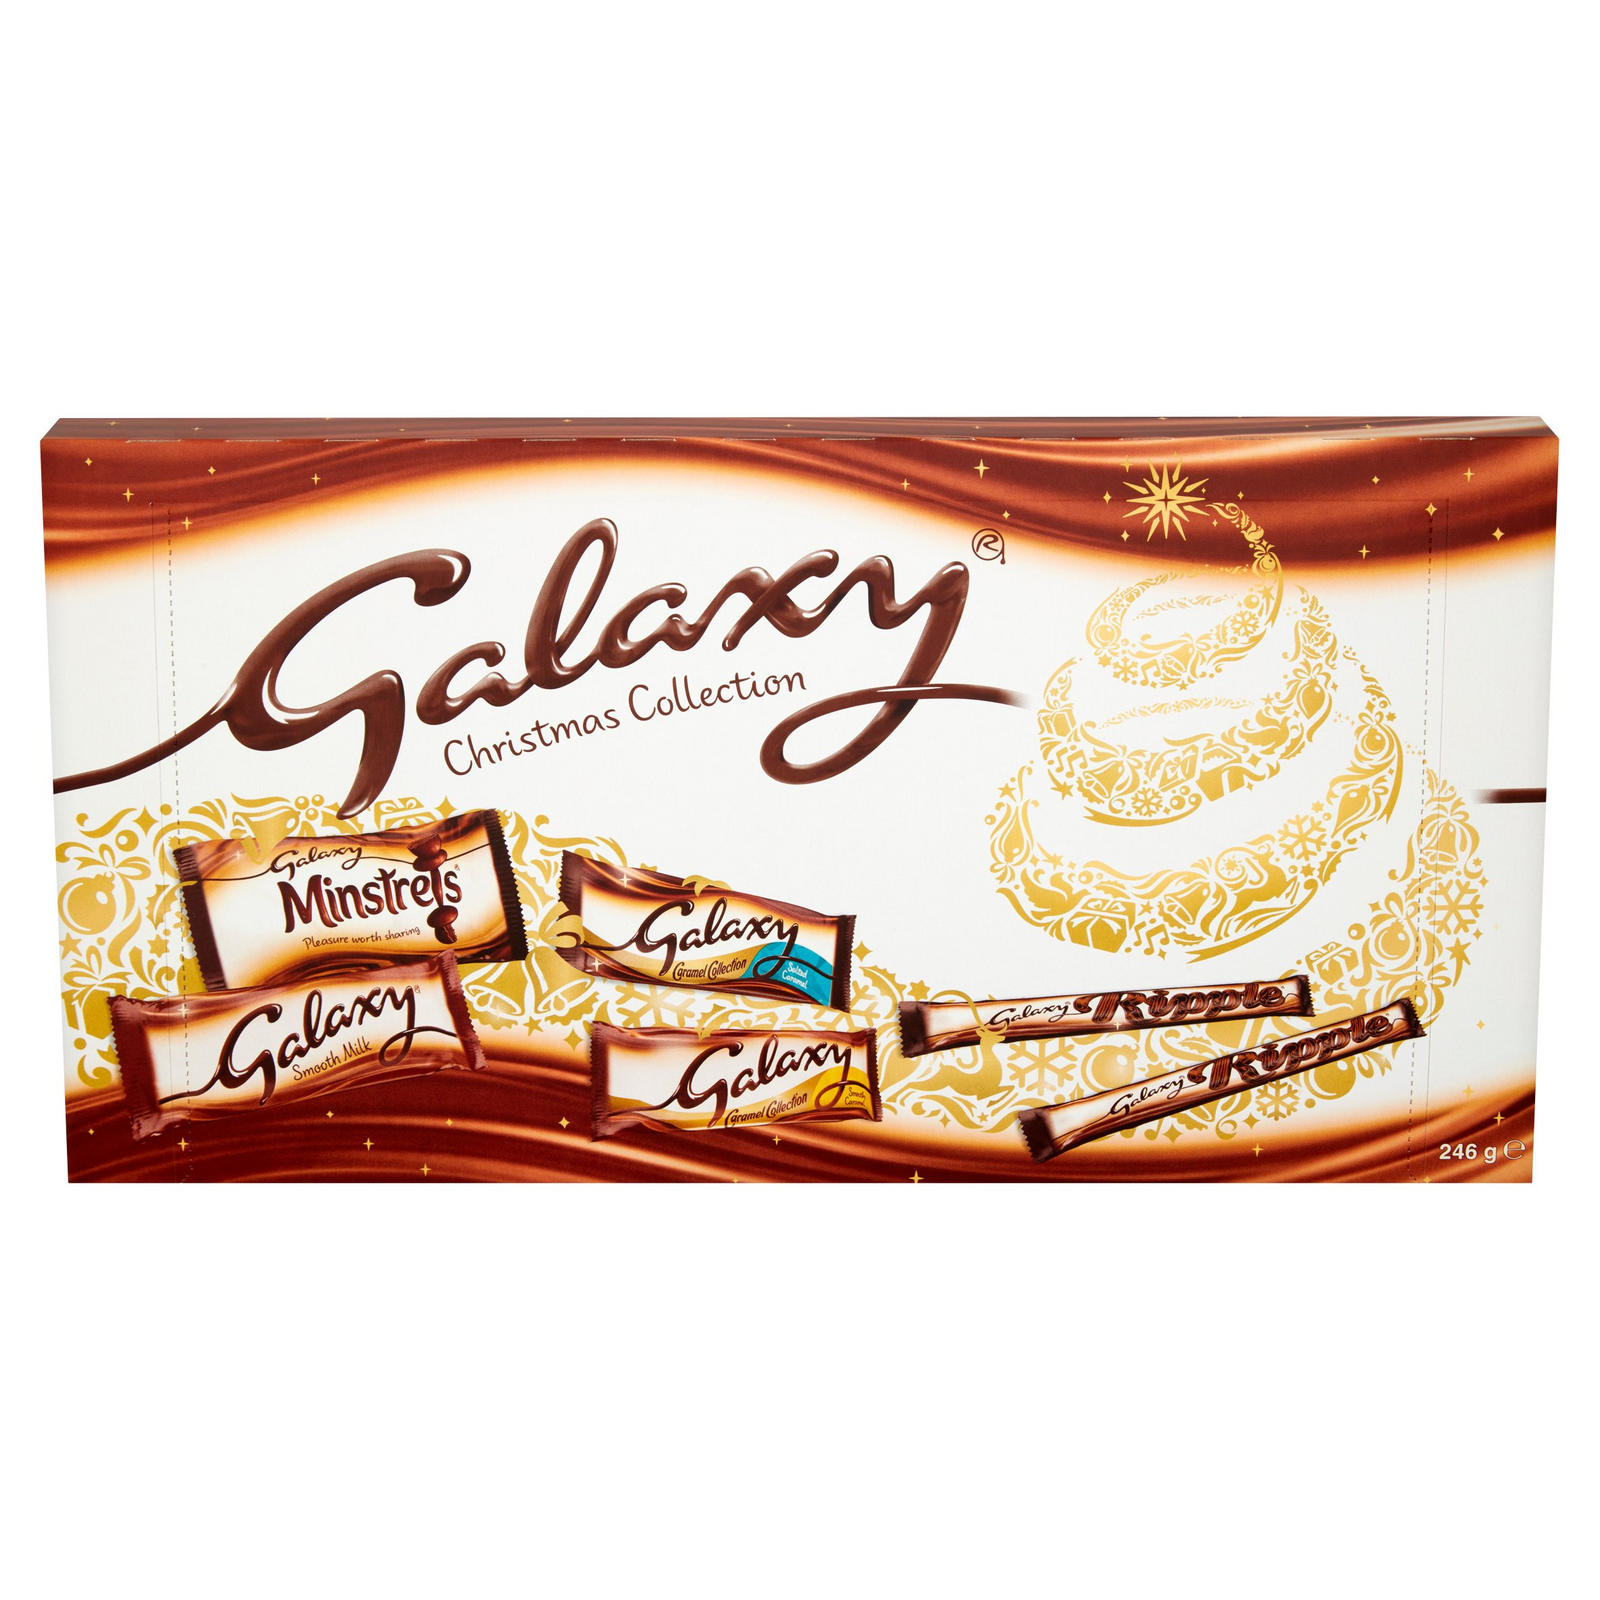 Galaxy Christmas Collection Selection Box 246g | Iceland Foods